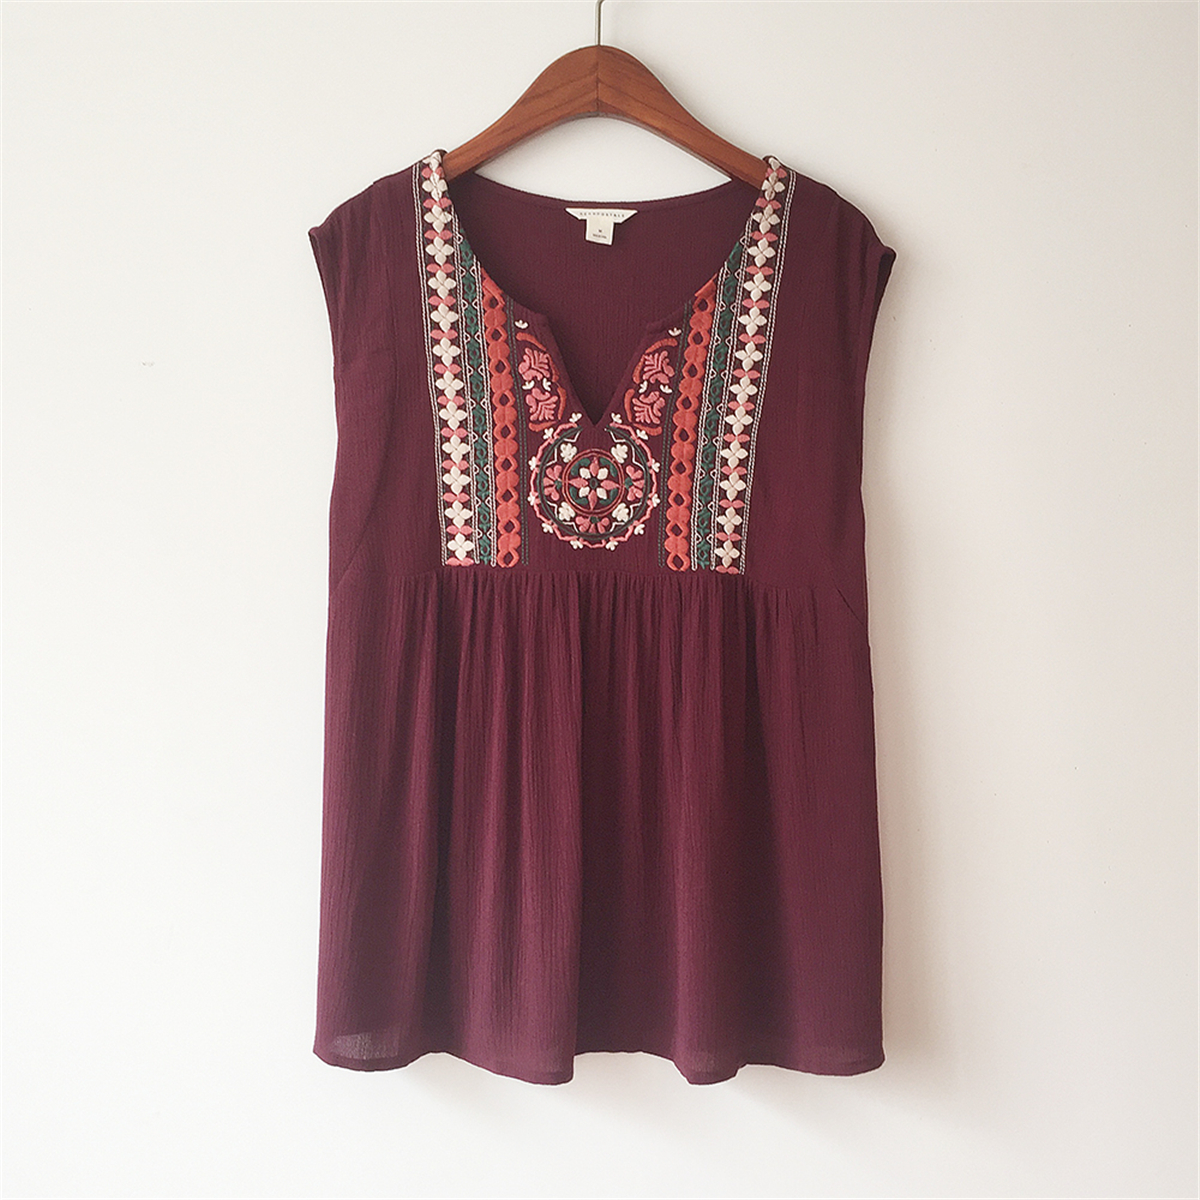 Jingyi foreign trade export sleeveless heavy embroidery womens summer dress new top summer dress new embroidery versatile